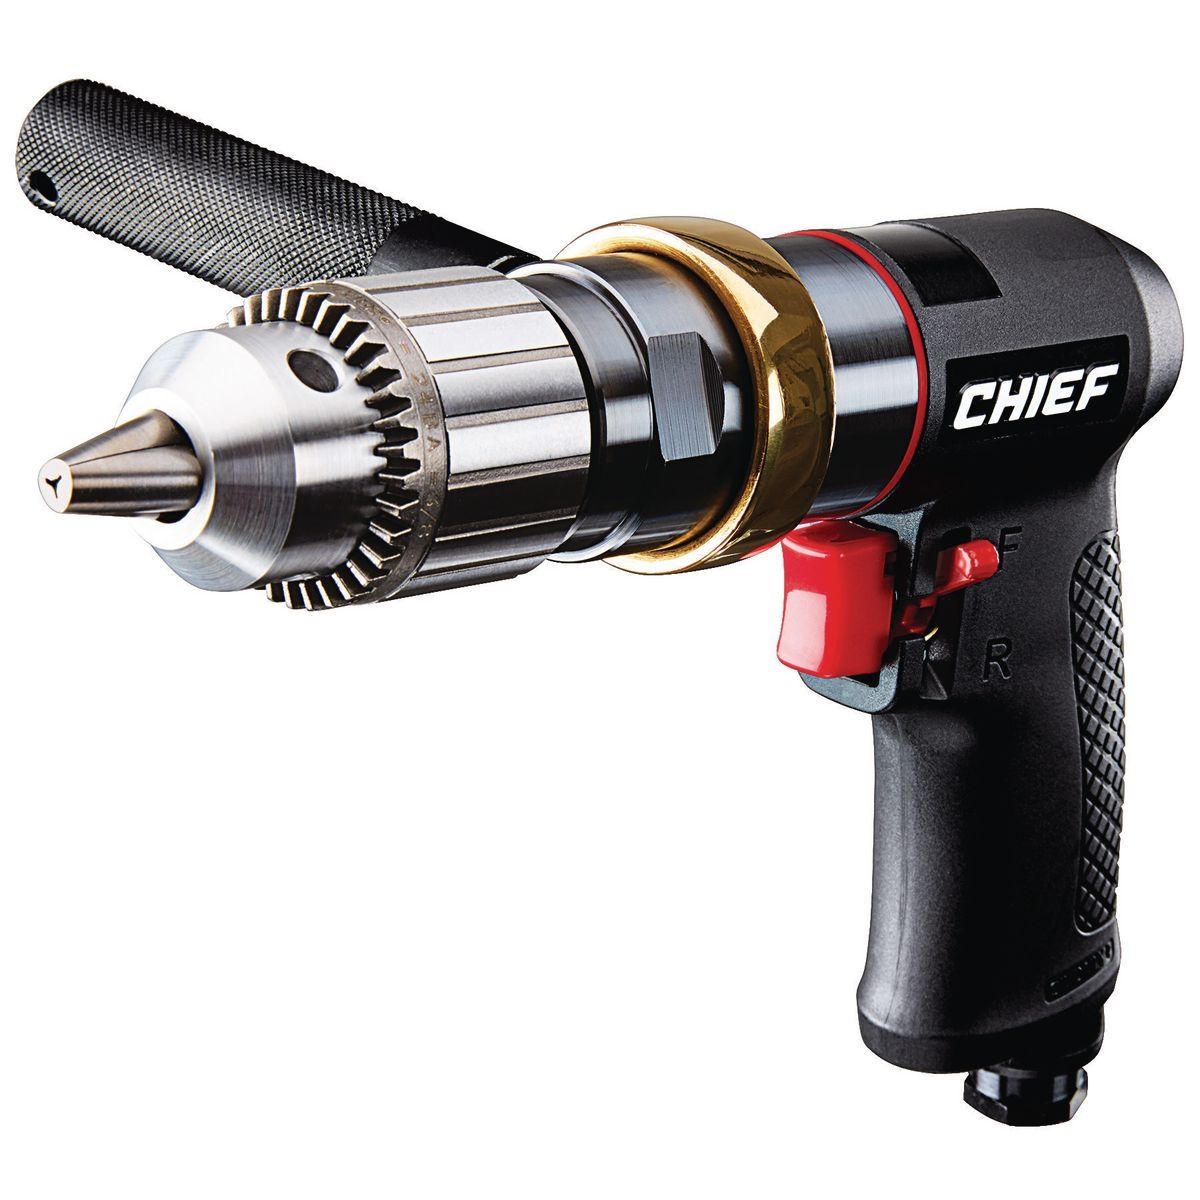 CHIEF 1/2 in. Professional Reversible Air Drill